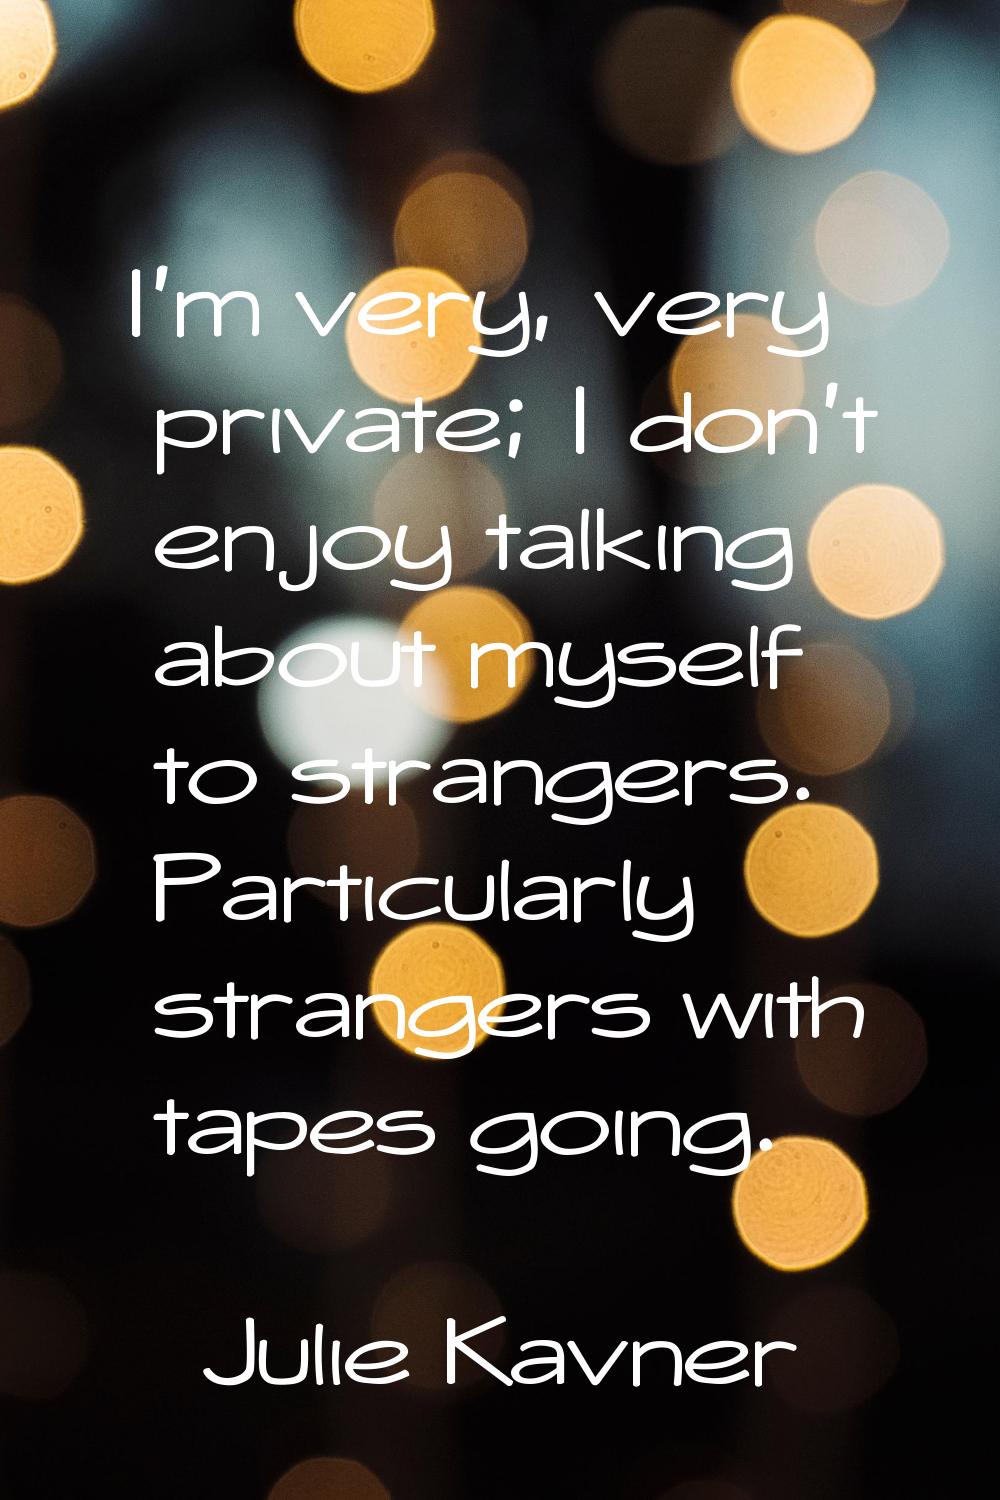 I'm very, very private; I don't enjoy talking about myself to strangers. Particularly strangers wit